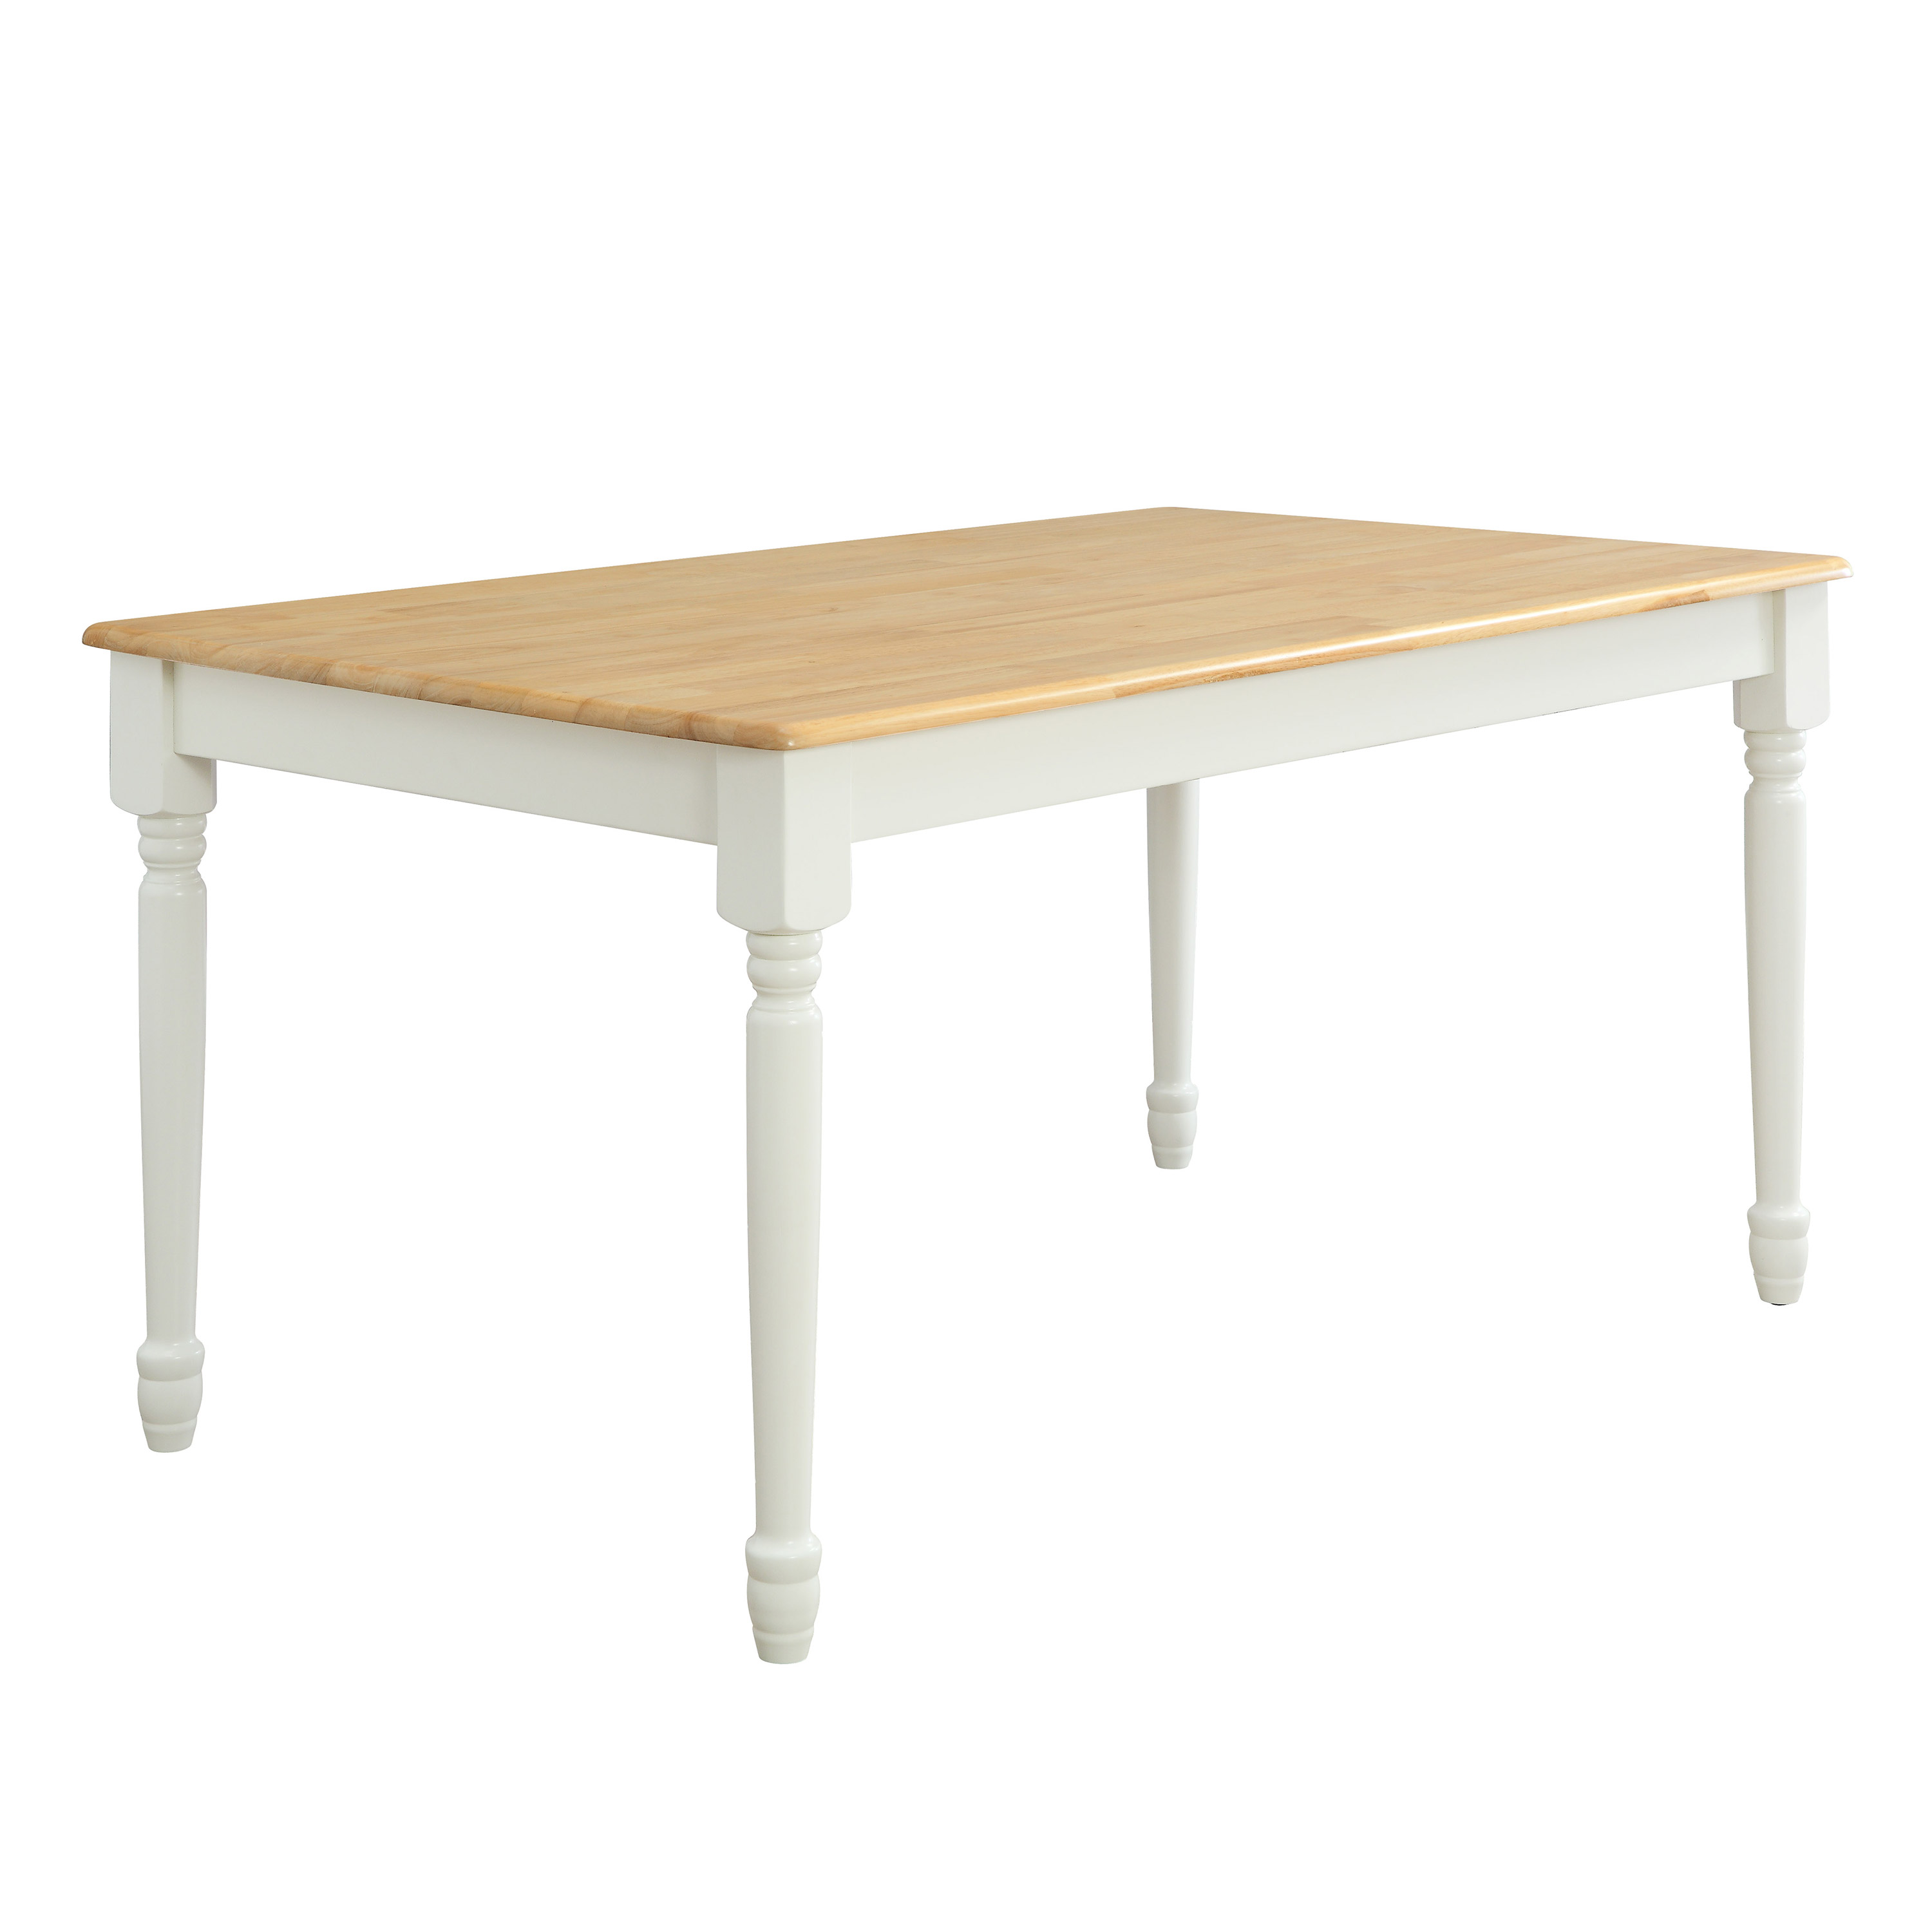 Better Homes and Gardens Autumn Lane Farmhouse Dining Table, White and Natural (Table only) - image 3 of 9